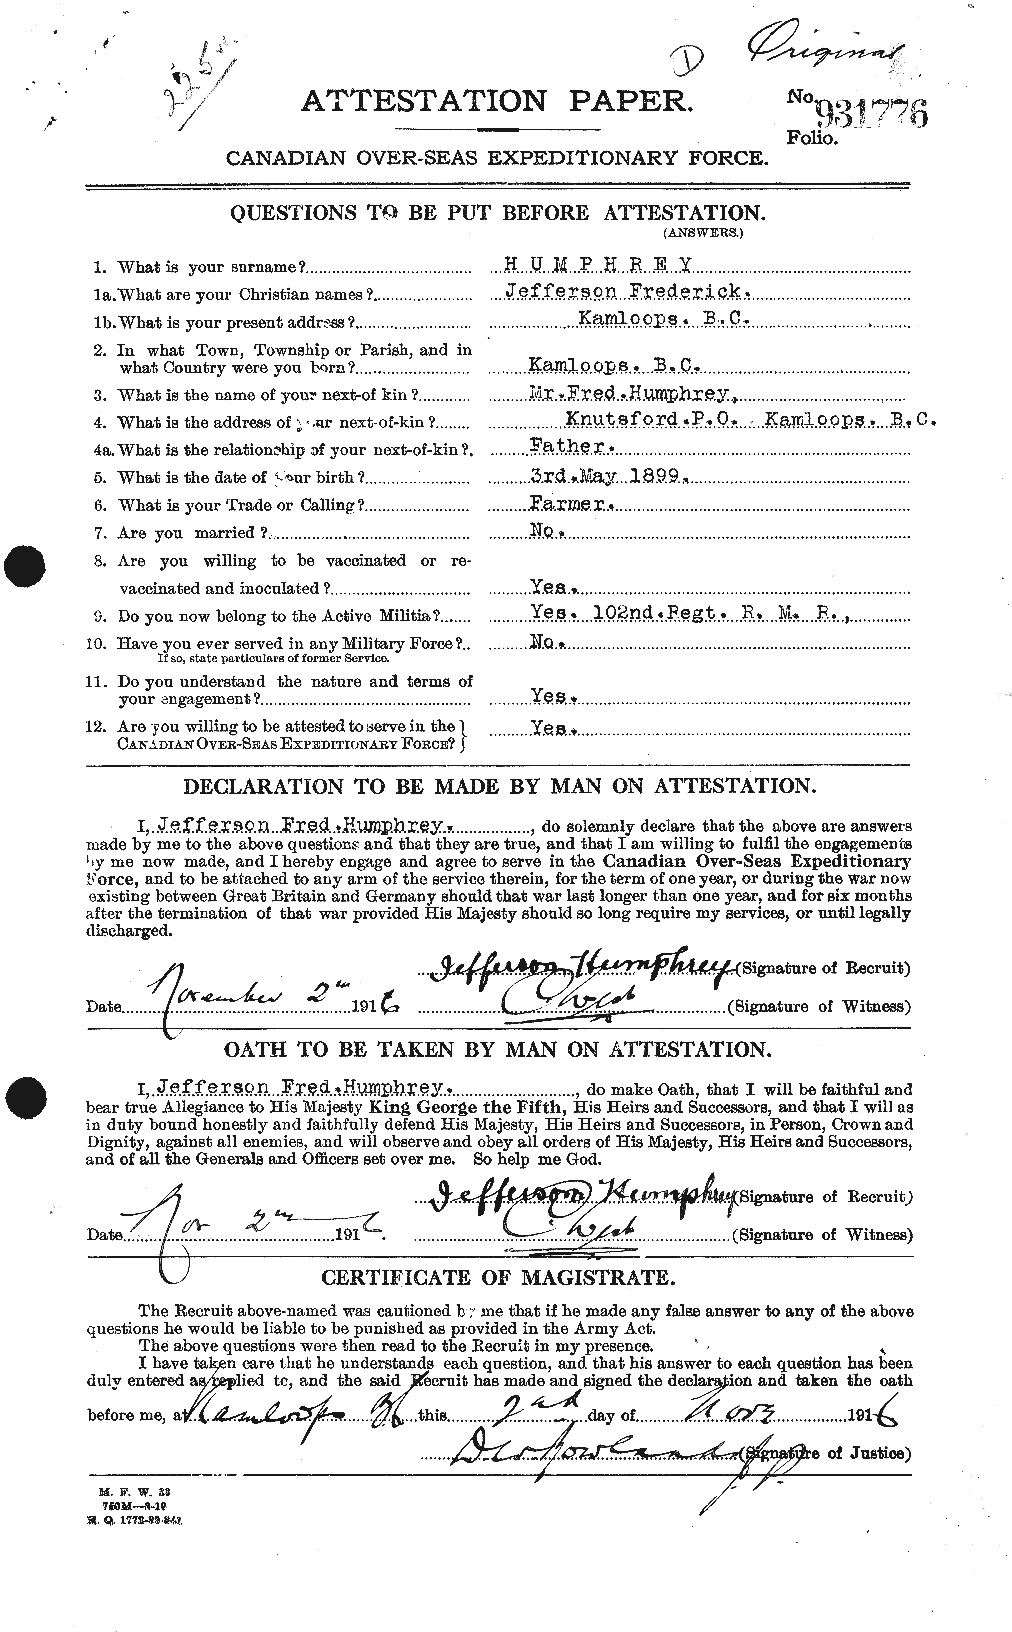 Personnel Records of the First World War - CEF 407413a